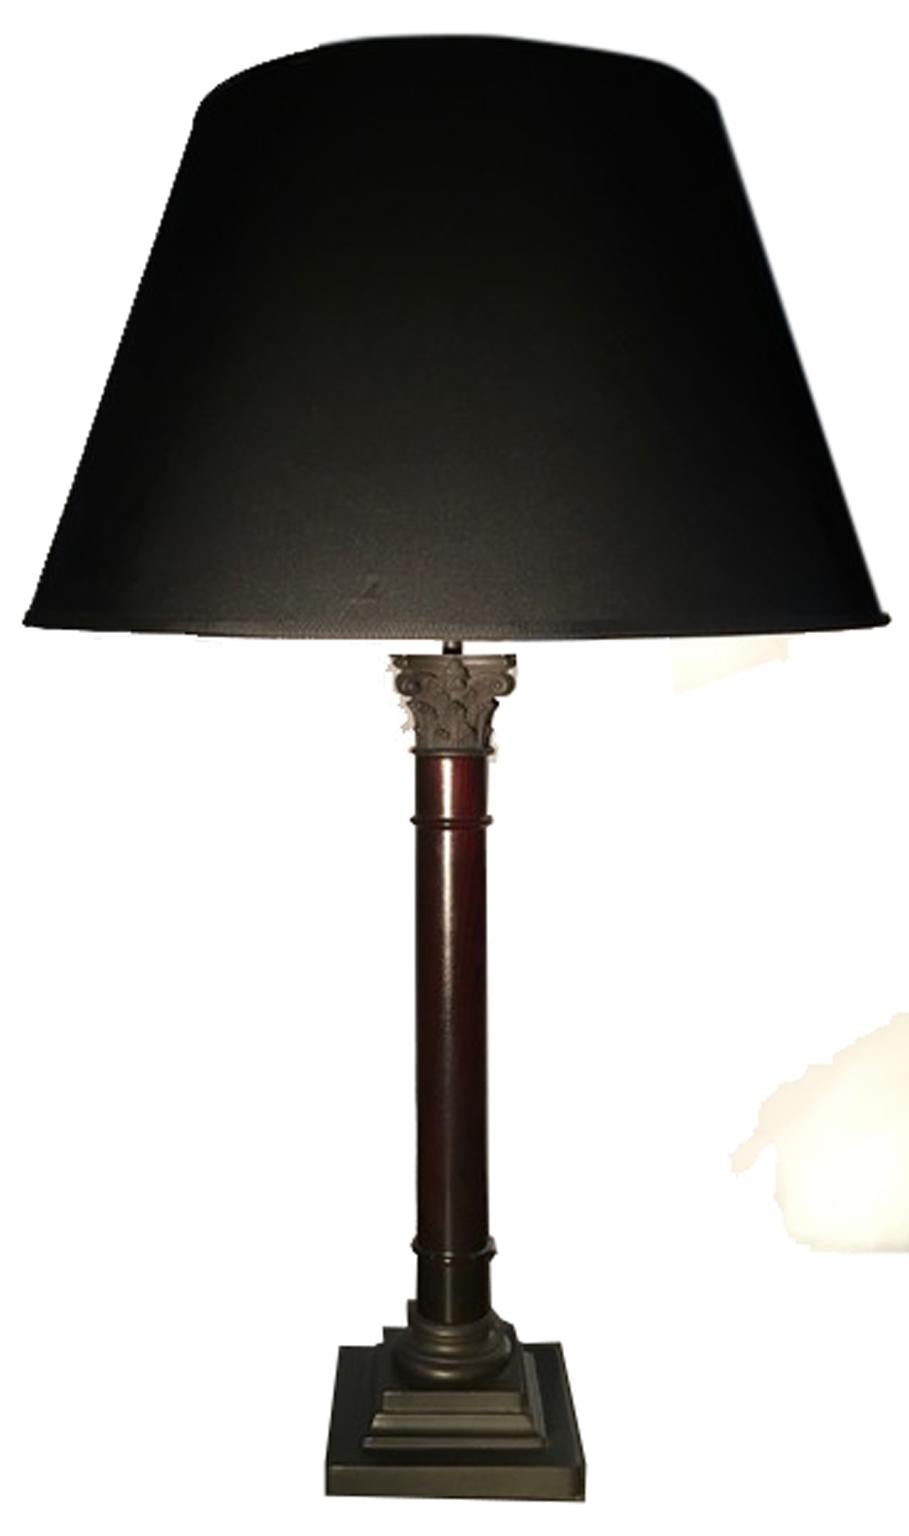 This elegant table lamp is an Italian  contemporary production.
The column in wood has a wenghe finish, the lampshade is in black fabric.
On the top and on the foot there are bronze cast details.

EU wiring
USA GB wiring on request and price